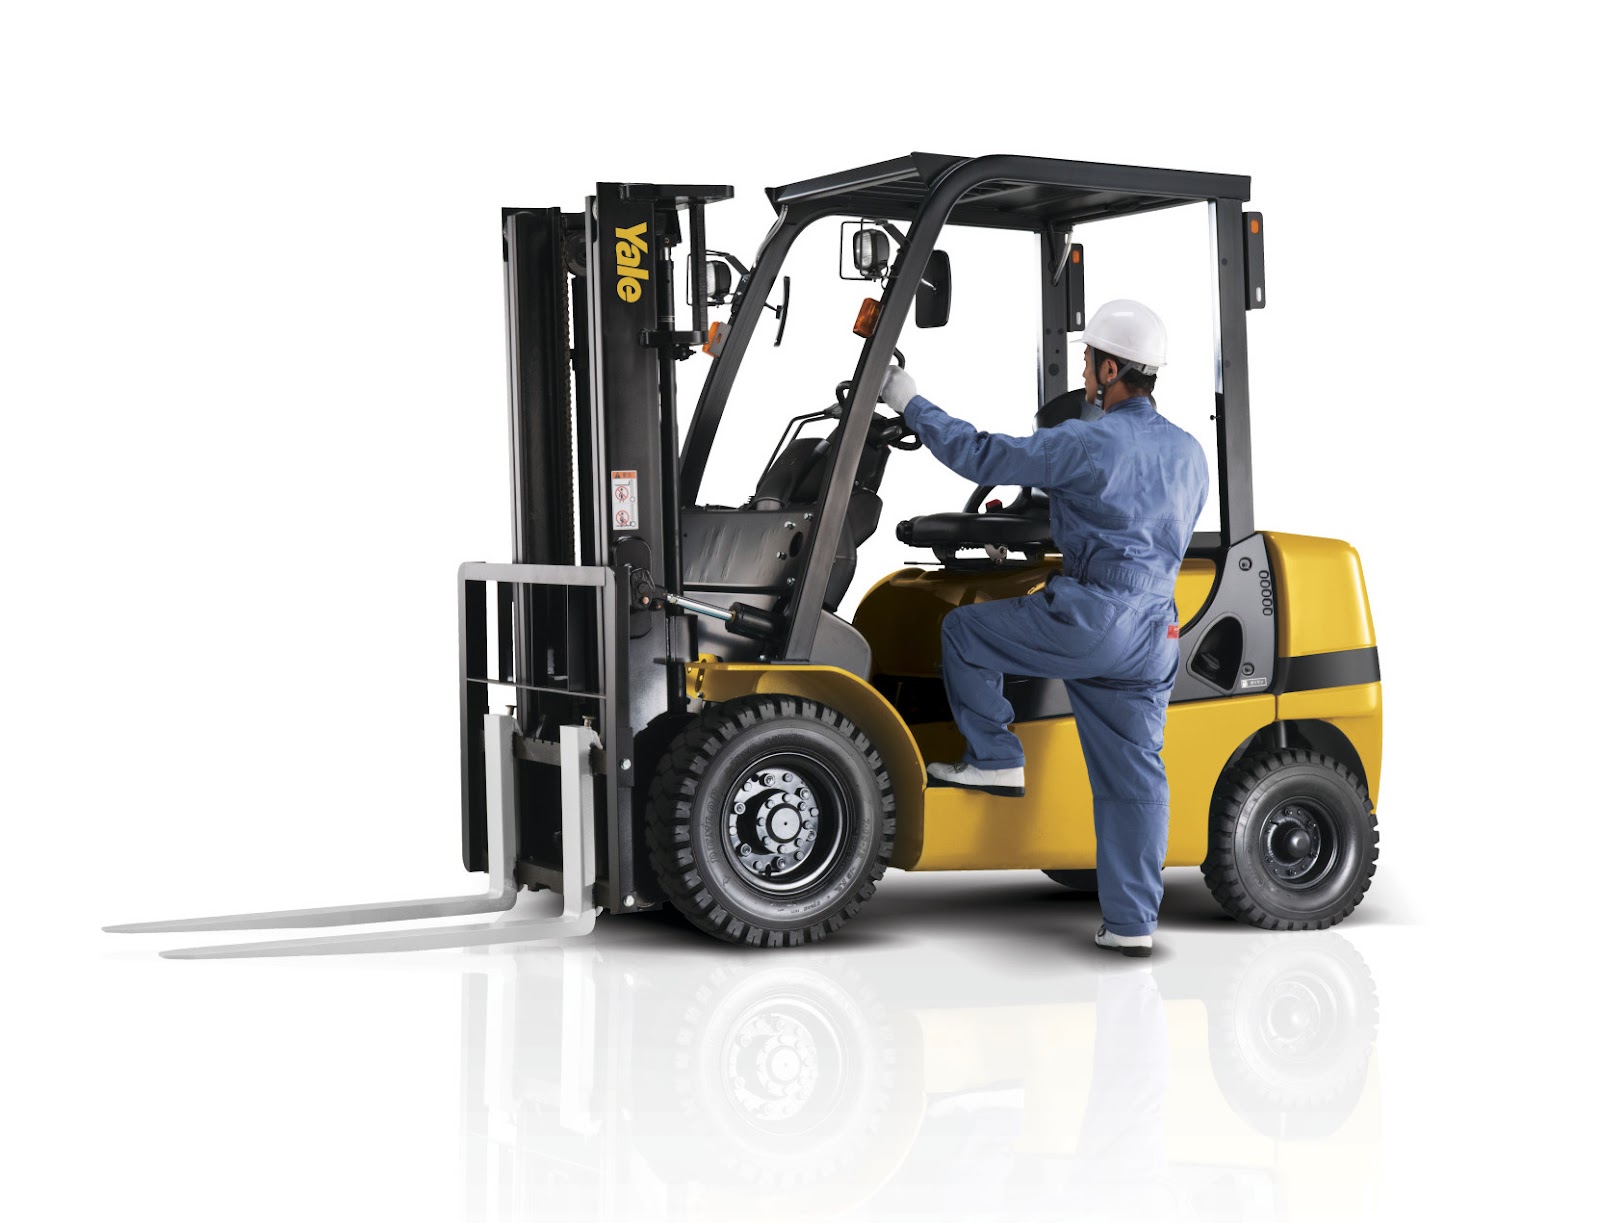 GDP25MX 2.5 ton diesel forklift with durable exceeds expectations